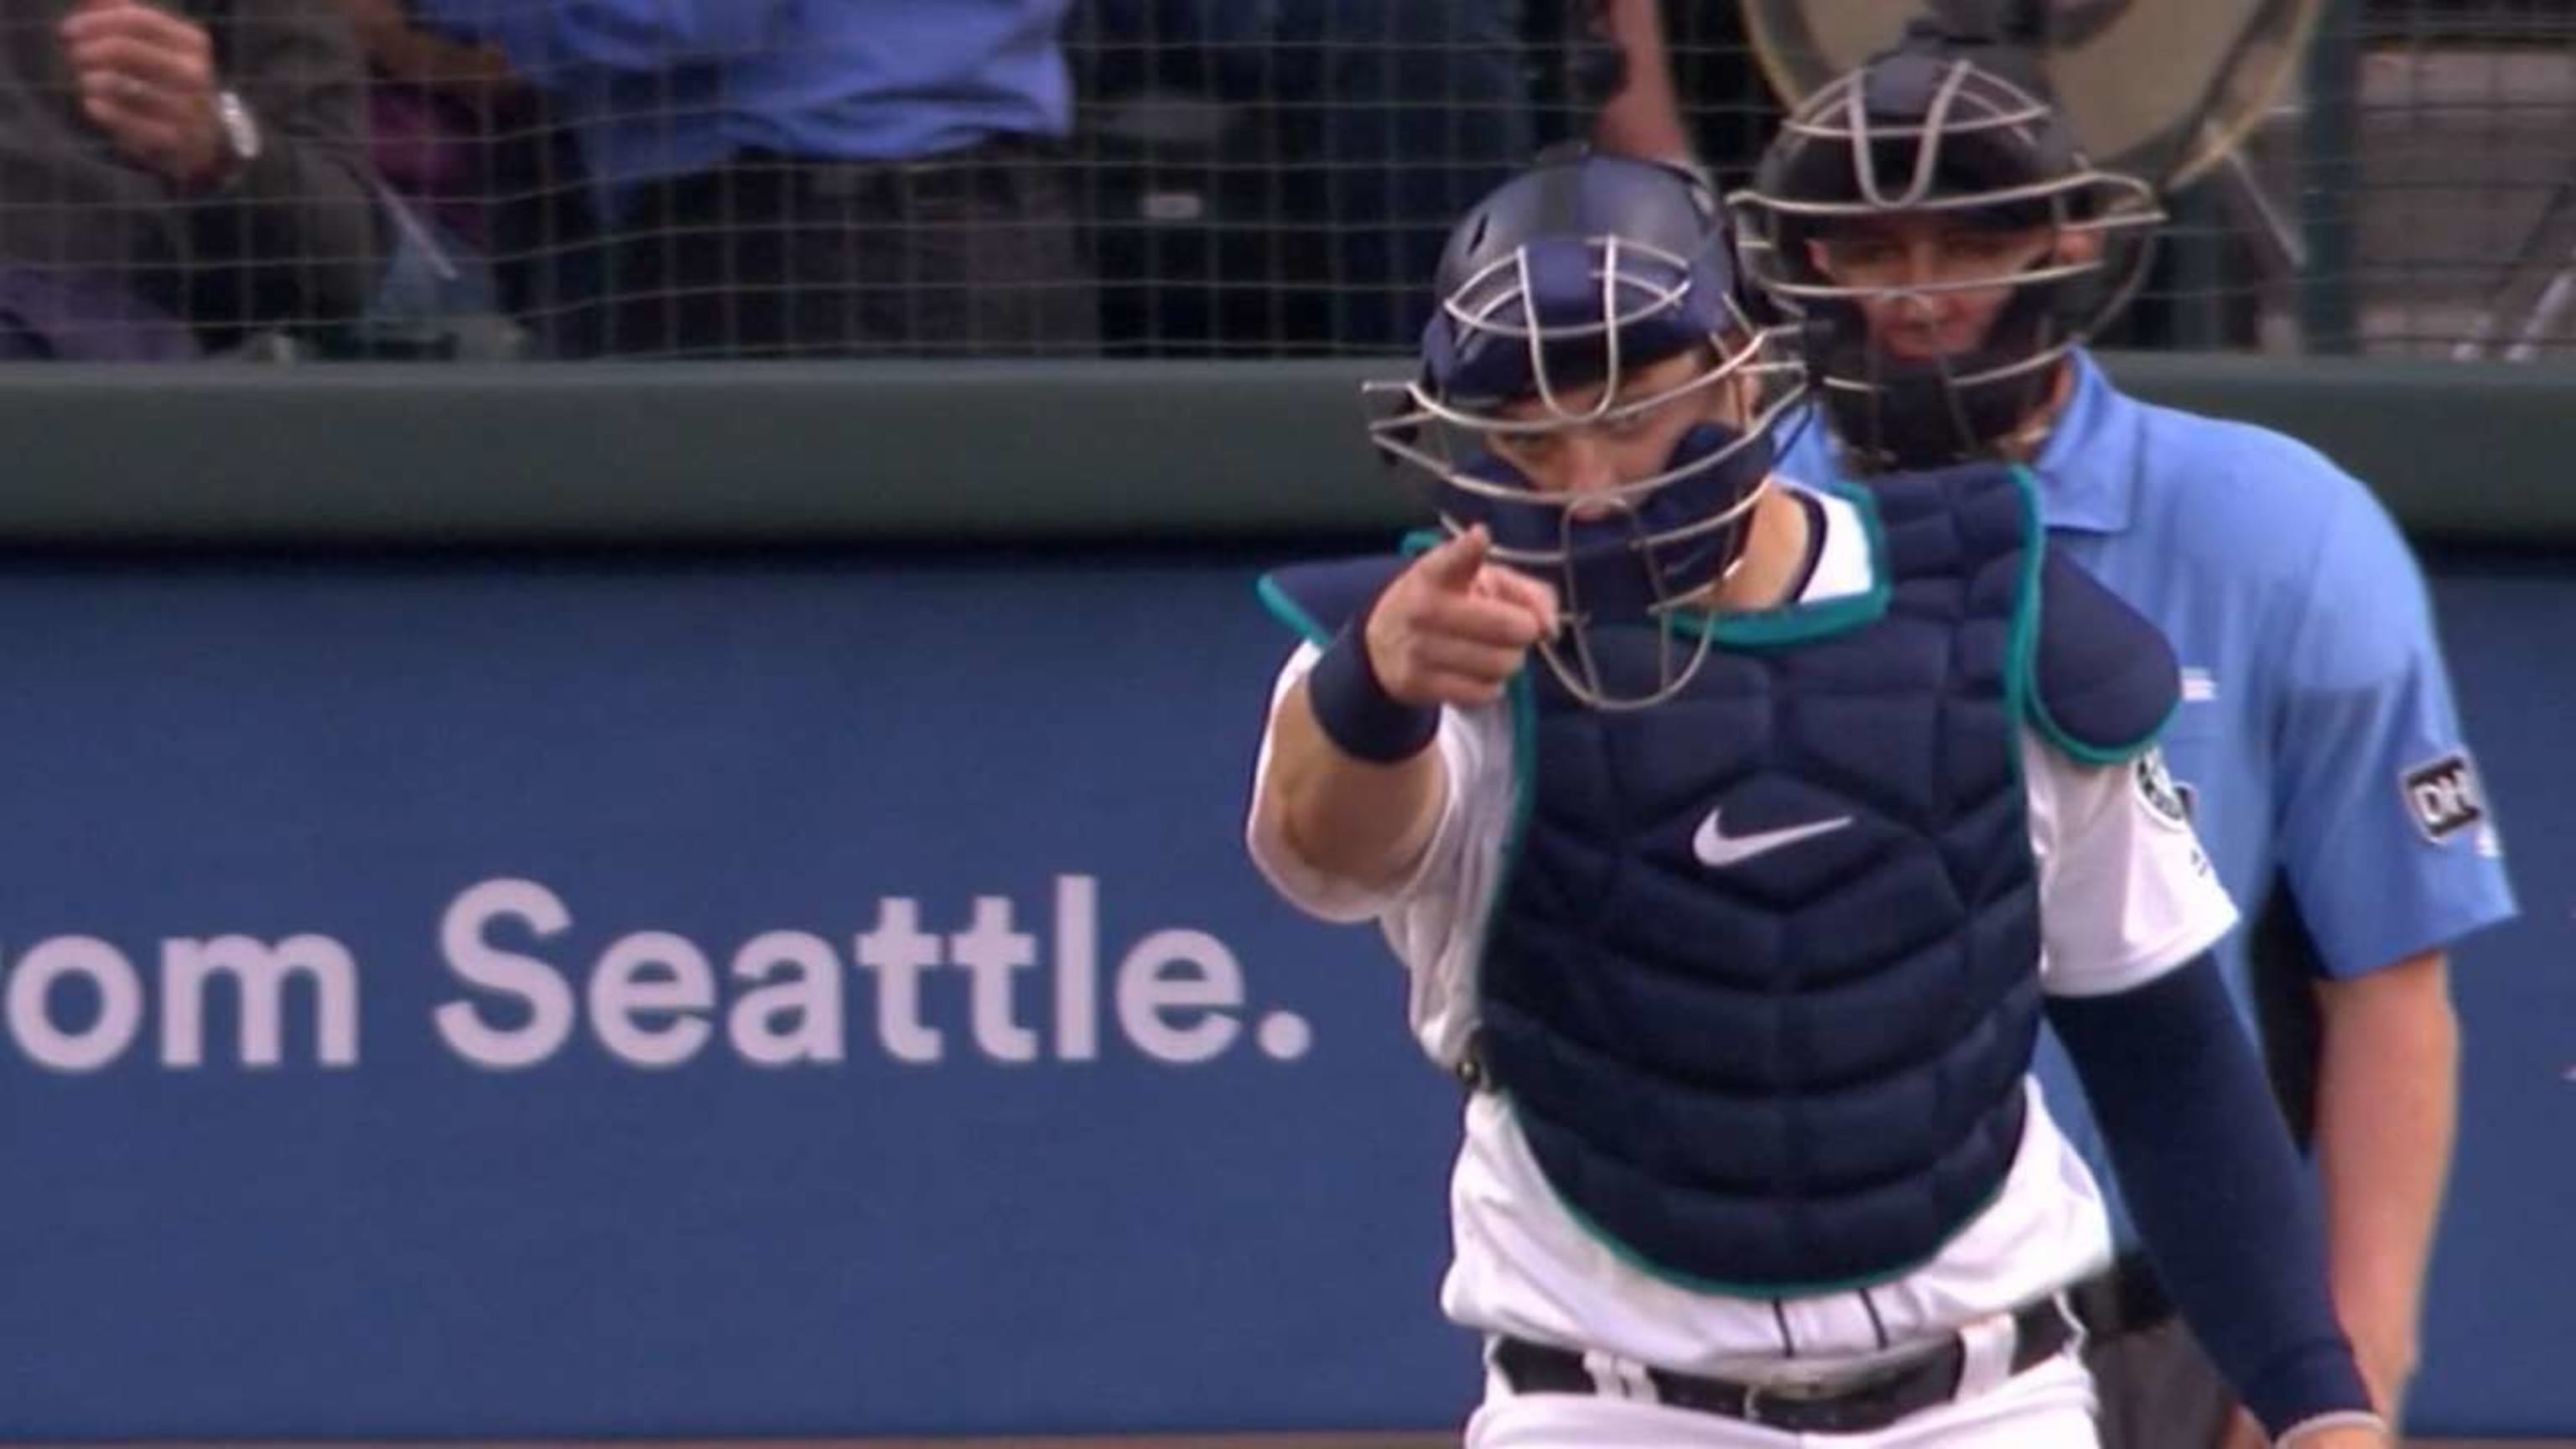 Reports: Rays close to acquiring catcher Mike Zunino from Mariners